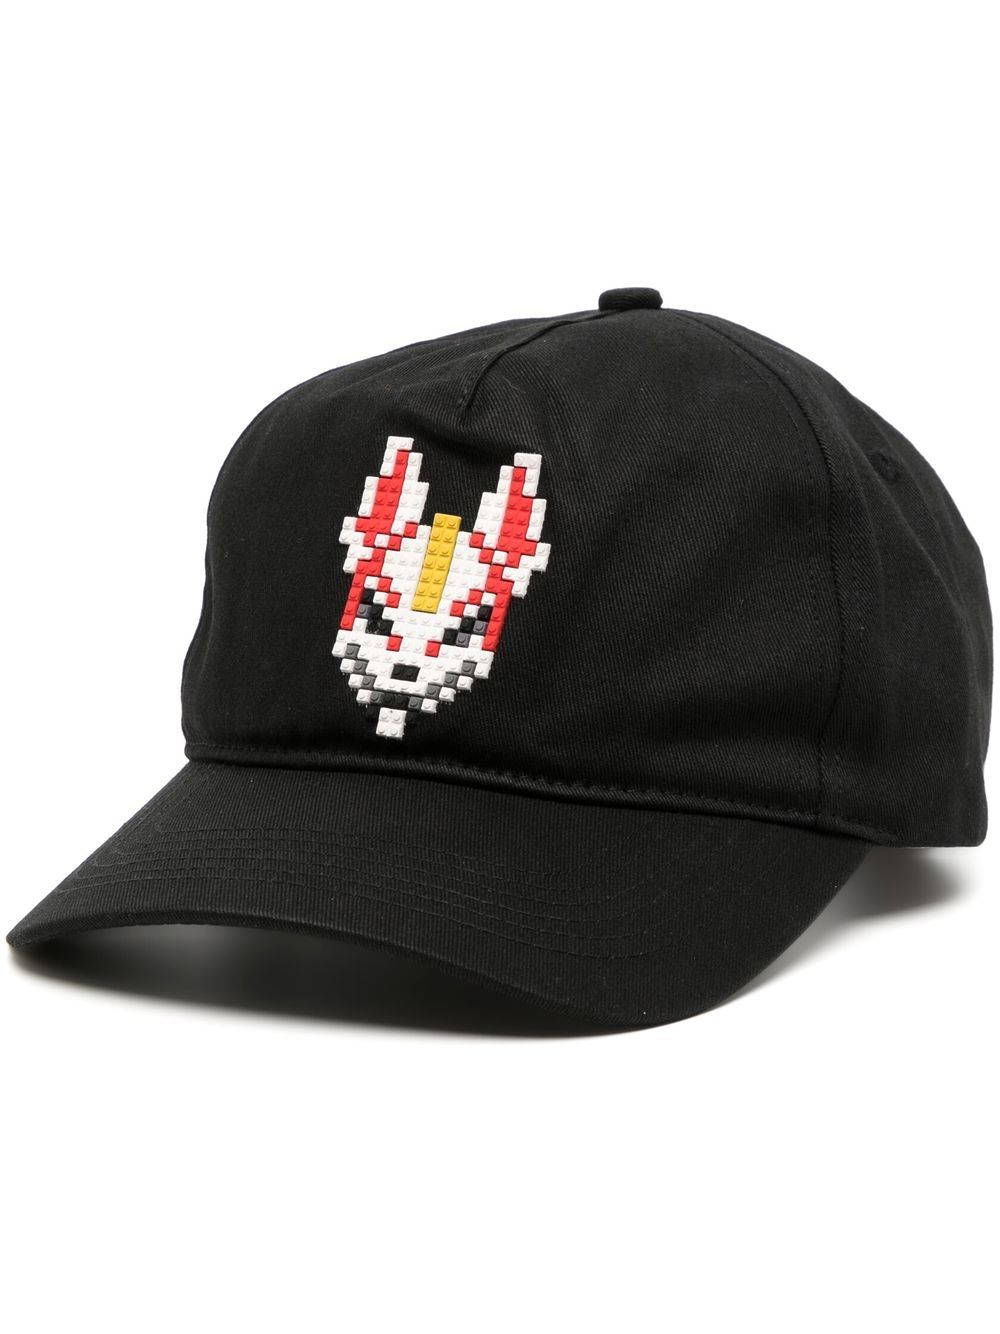 Mostly Heard Rarely Seen 8-Bit Last One Standing baseball cap - Black von Mostly Heard Rarely Seen 8-Bit